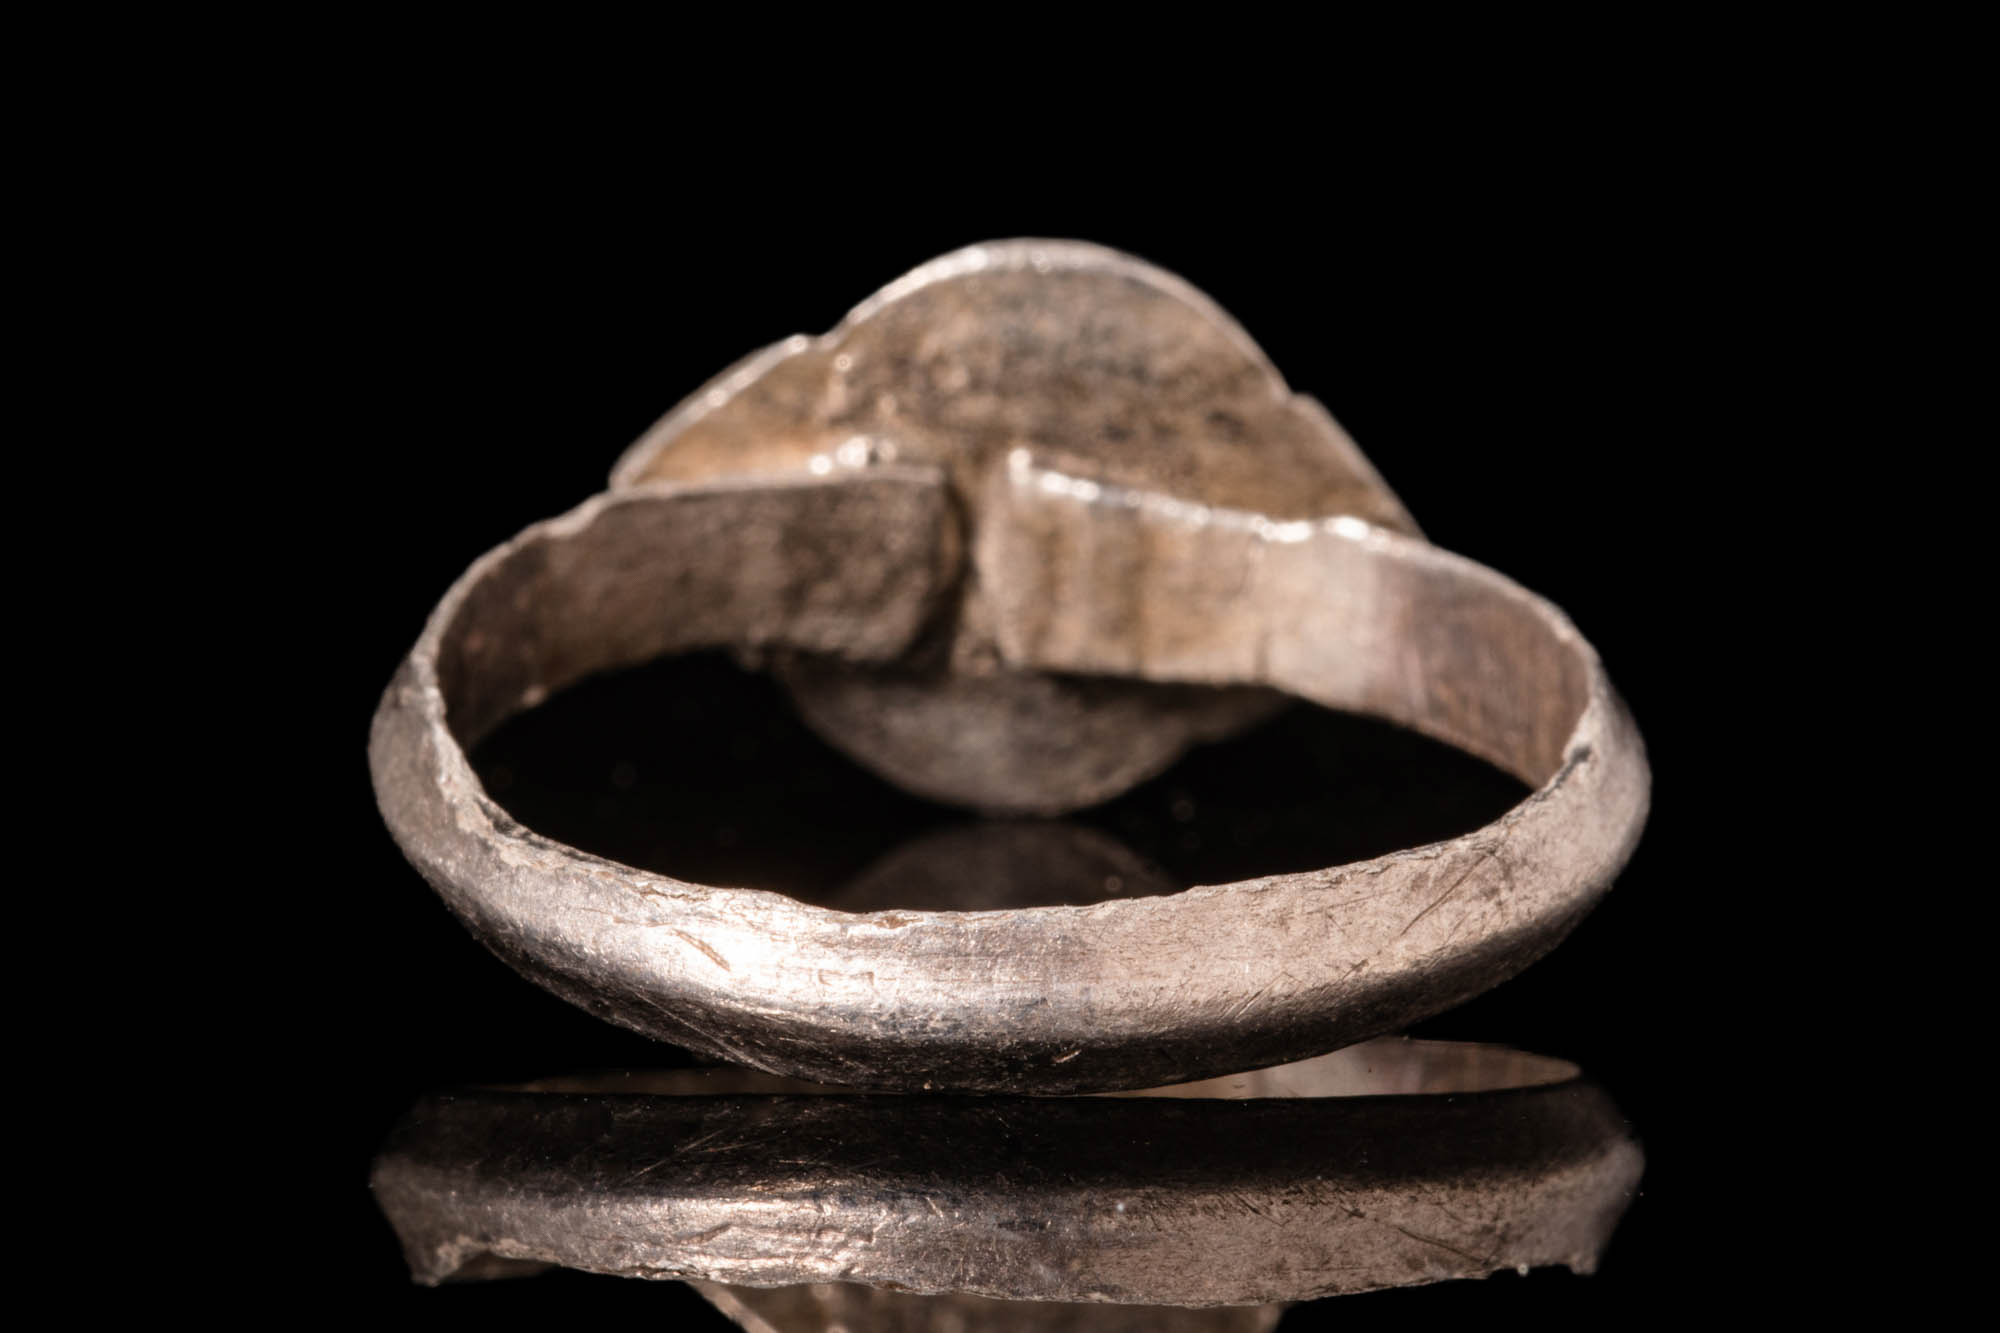 WESTERN EUROPEAN MEDIEVAL SILVER RING WITH SHIELD SHAPED BEZEL - Image 4 of 4